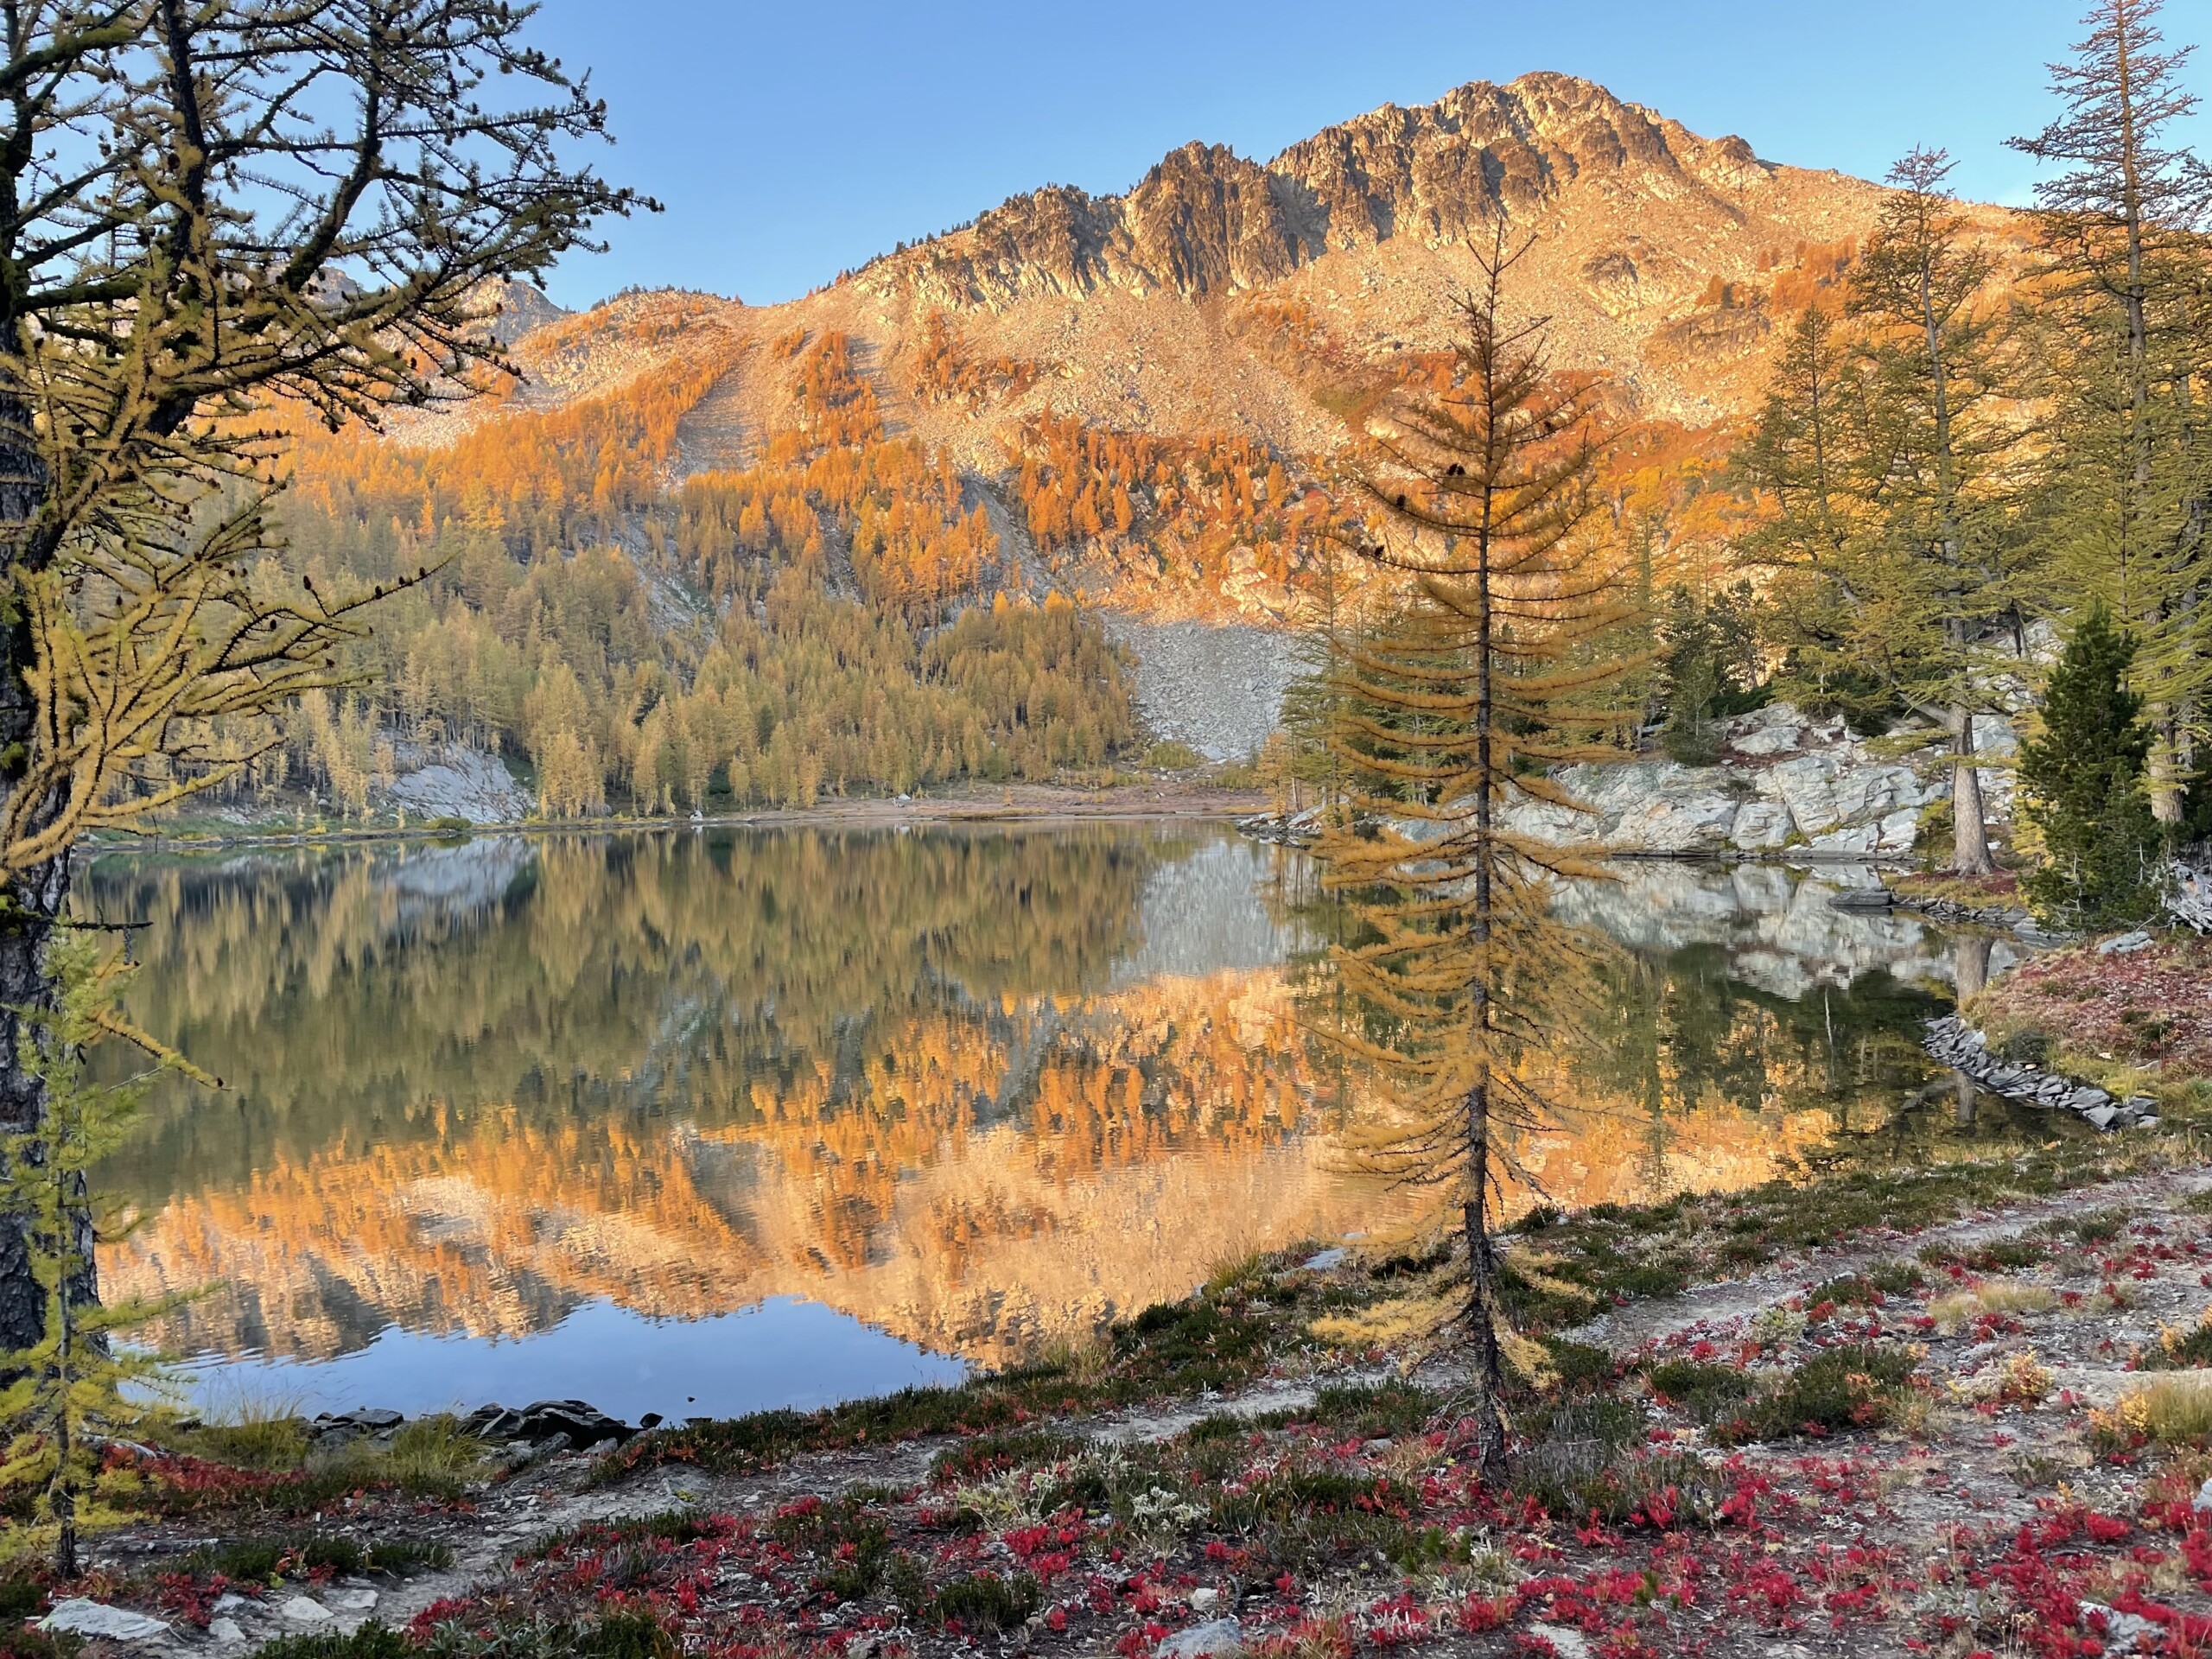 A view over a calm lake in the mountains. It is surrounded by golden larches.